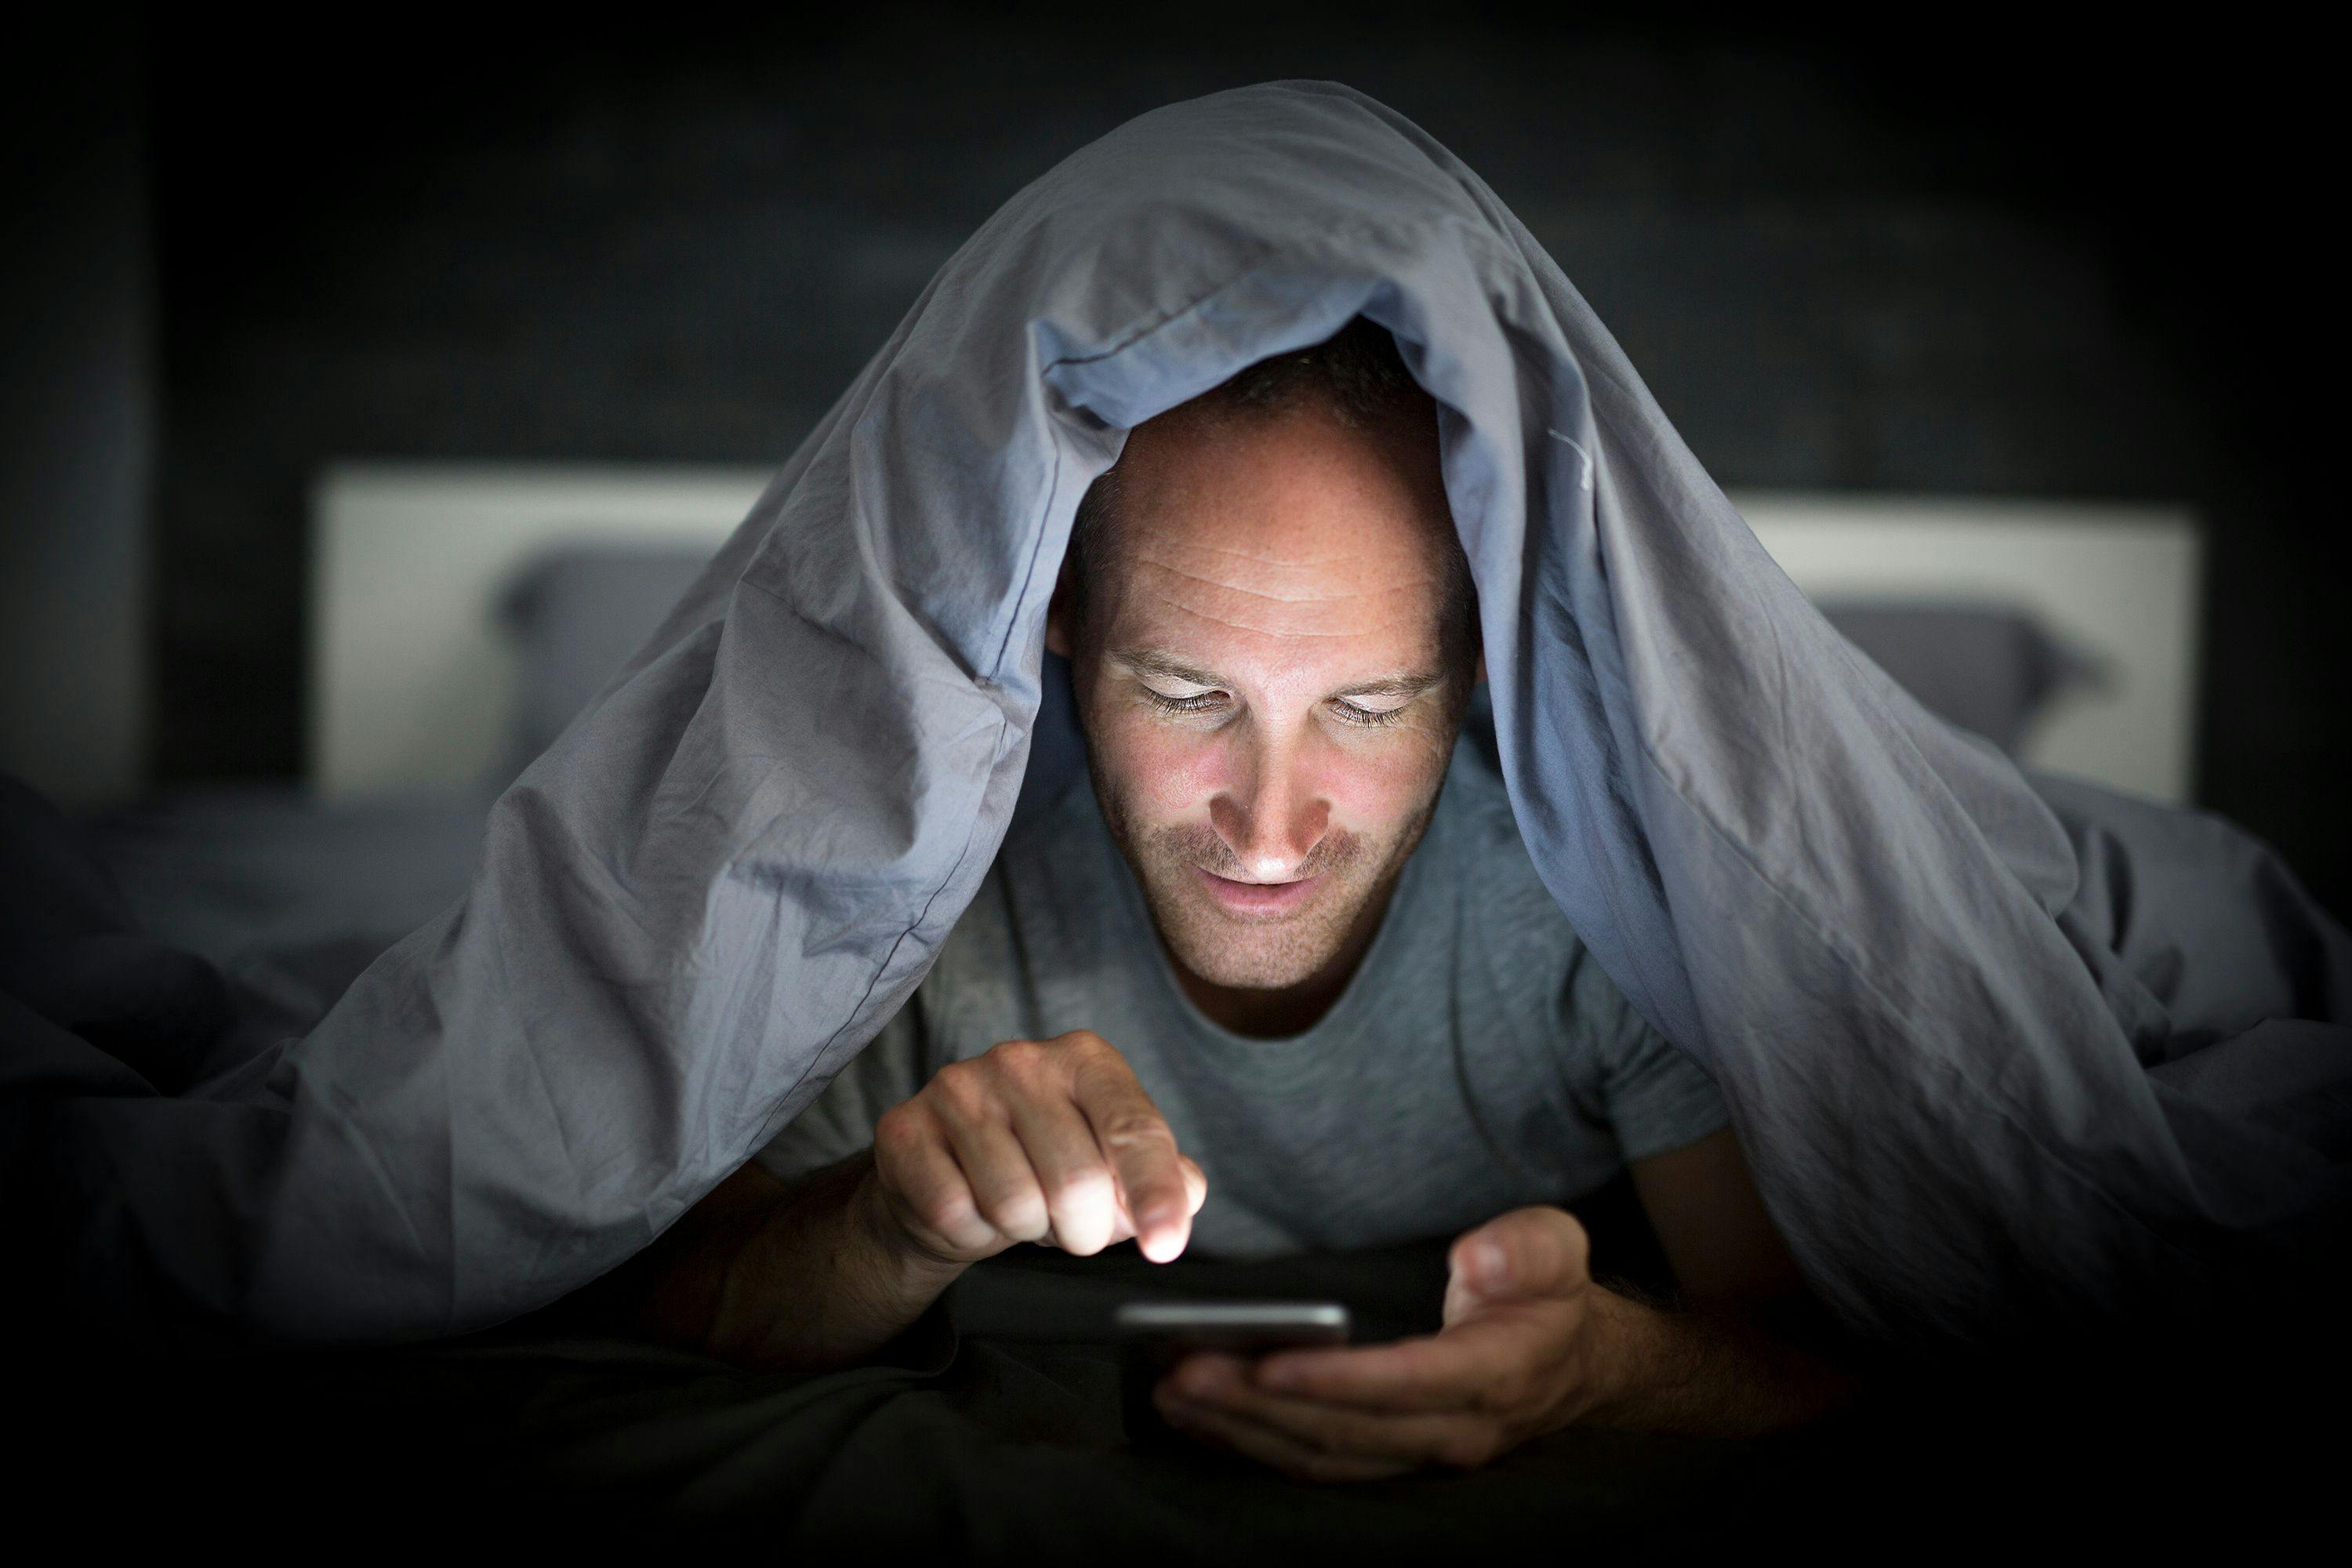 Man Endlessly Scrolling in Bed | image credit: Louis-Photo - stock.adobe.com